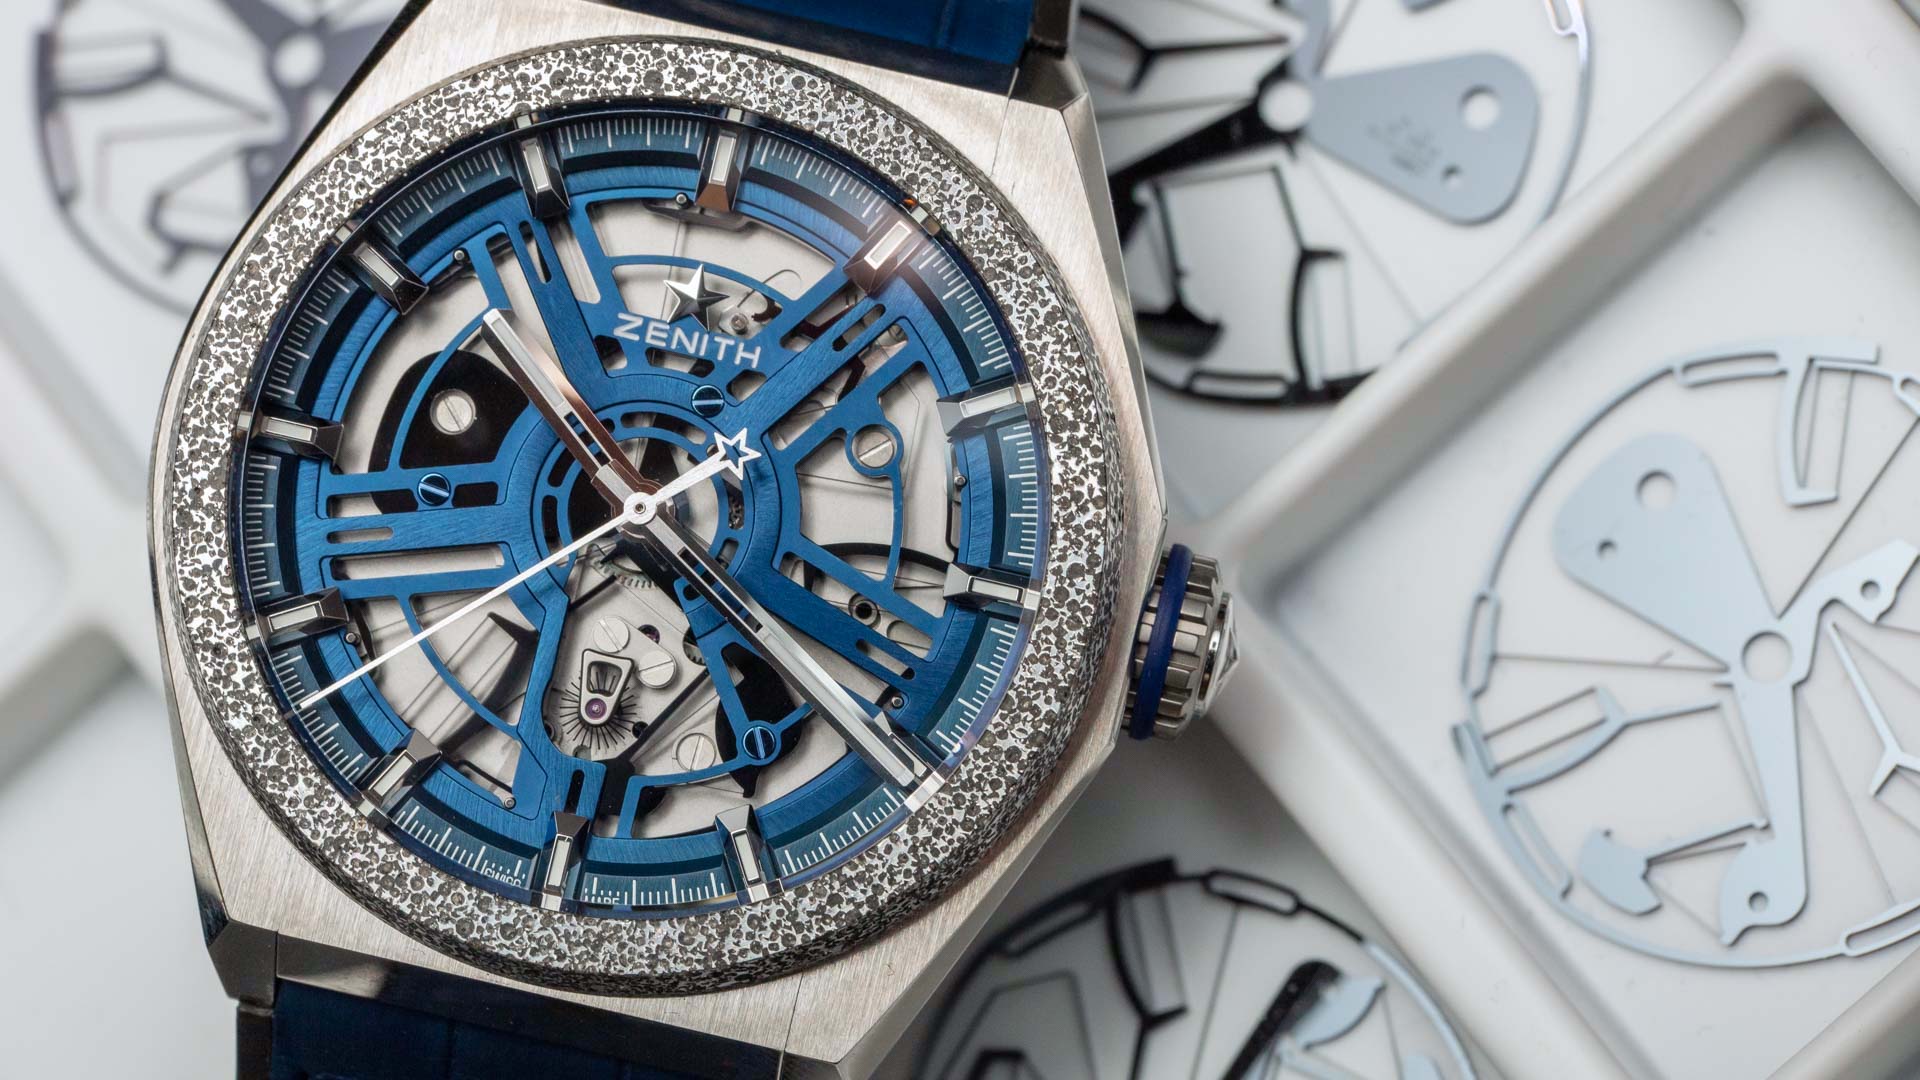 Zenith Unveils The Defy Revival A3691 Watch